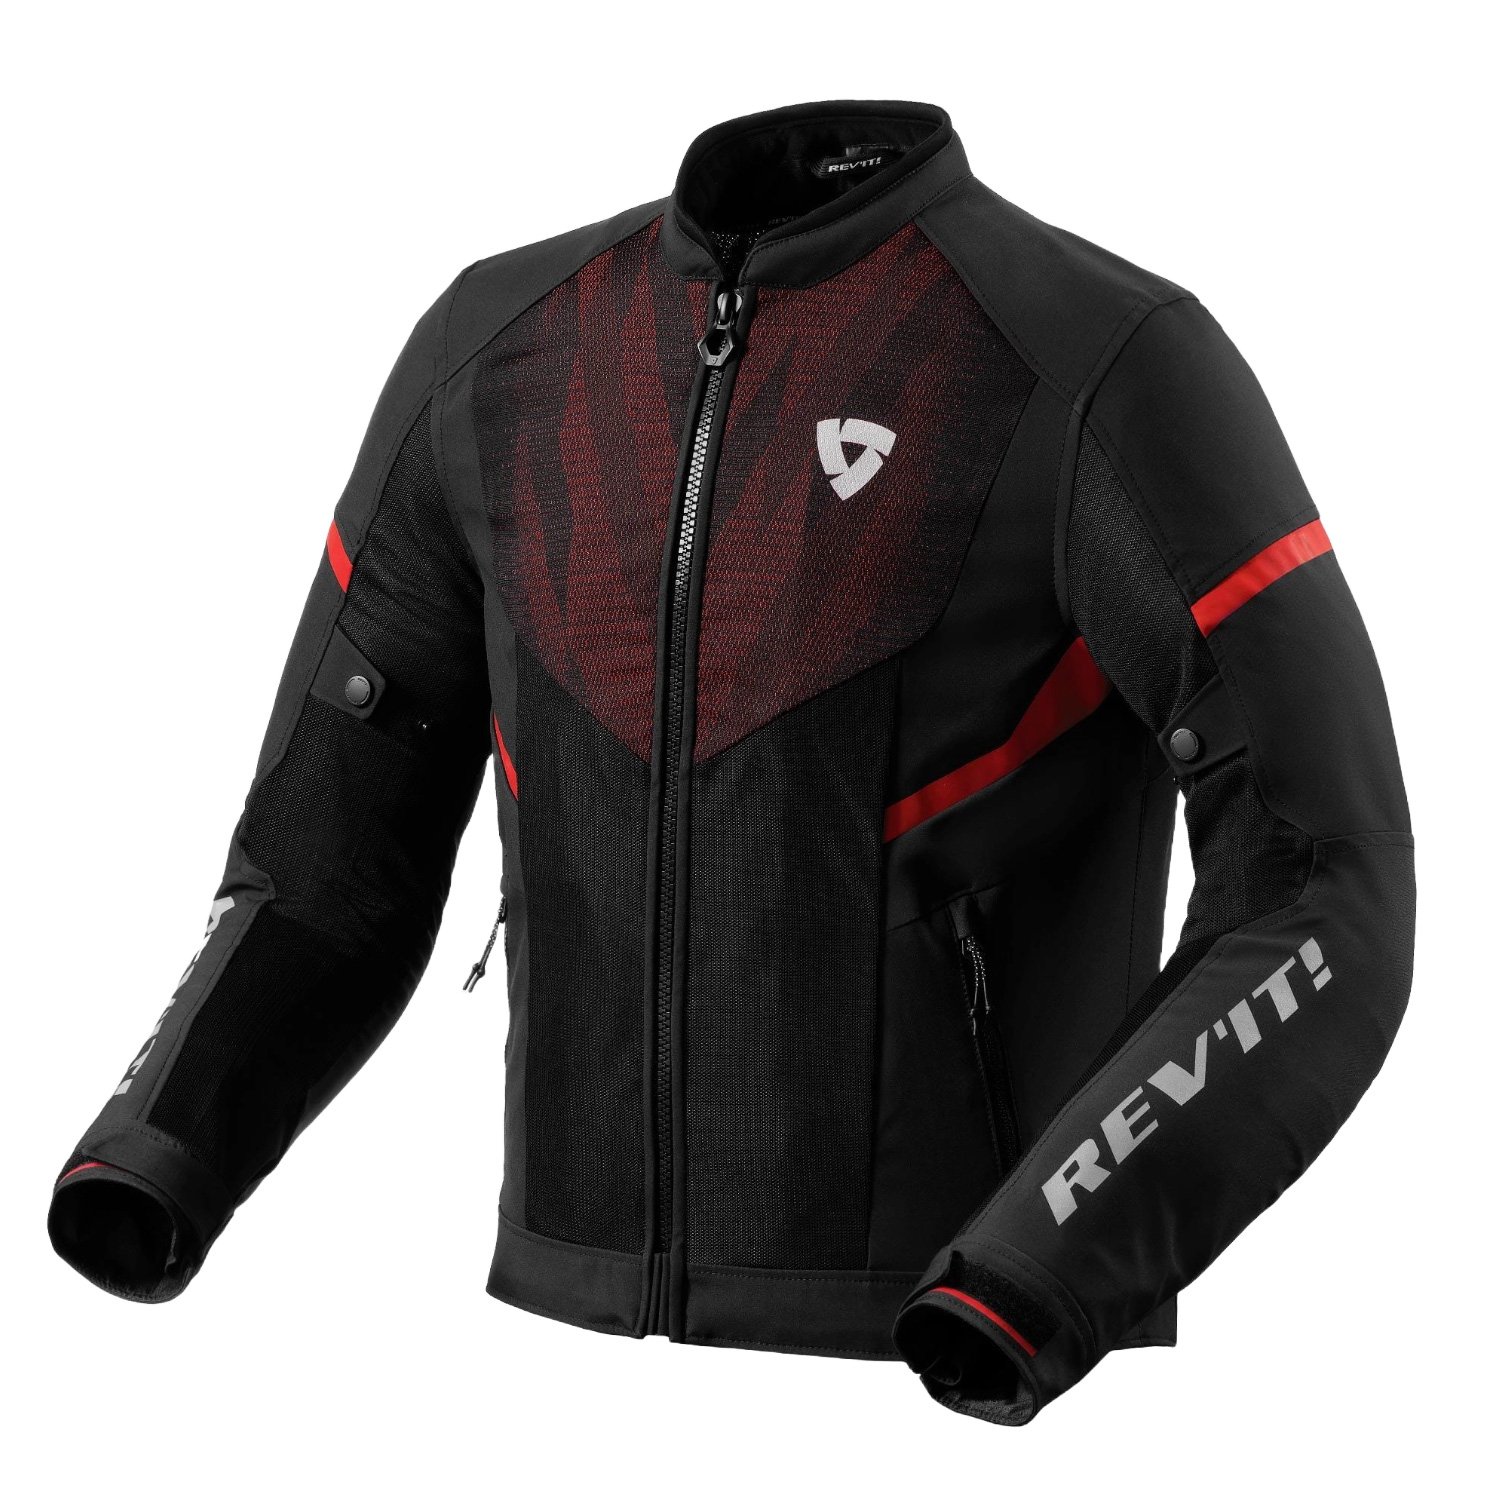 Image of REV'IT! Hyperspeed 2 GT Air Jacket Black Neon Red Talla 2XL